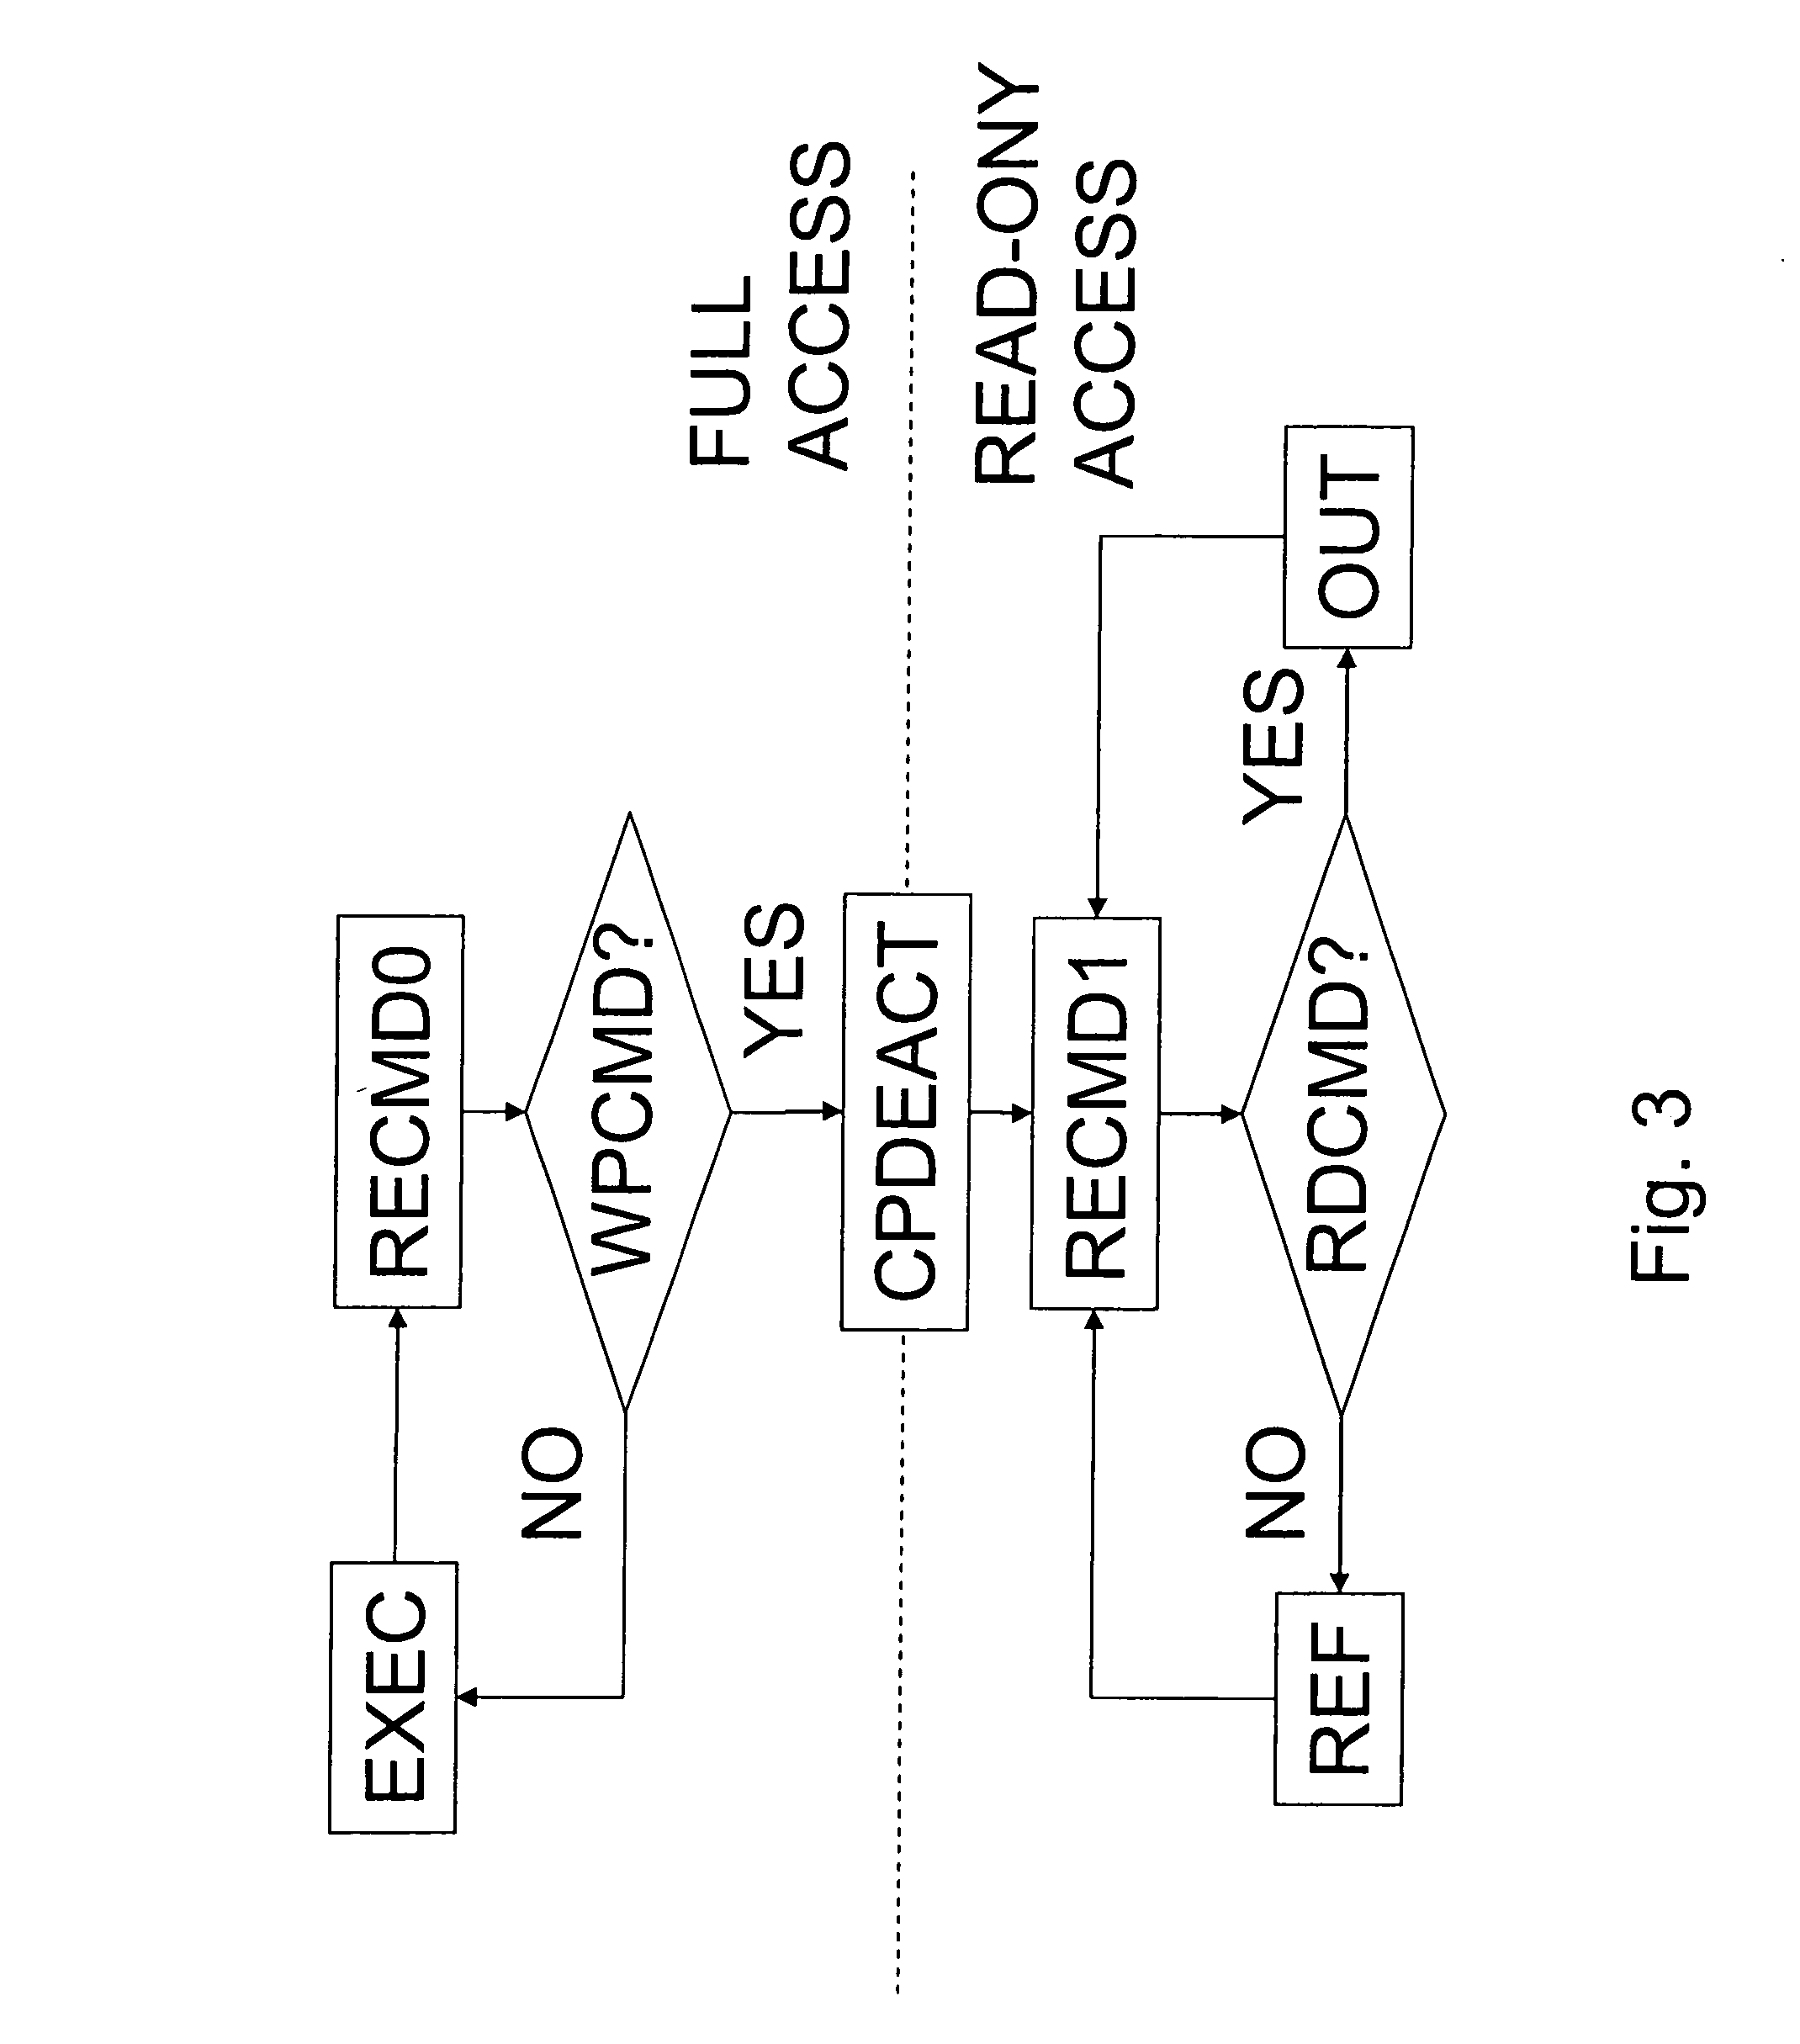 Non-volatile storage device with forgery-proof permanent storage option